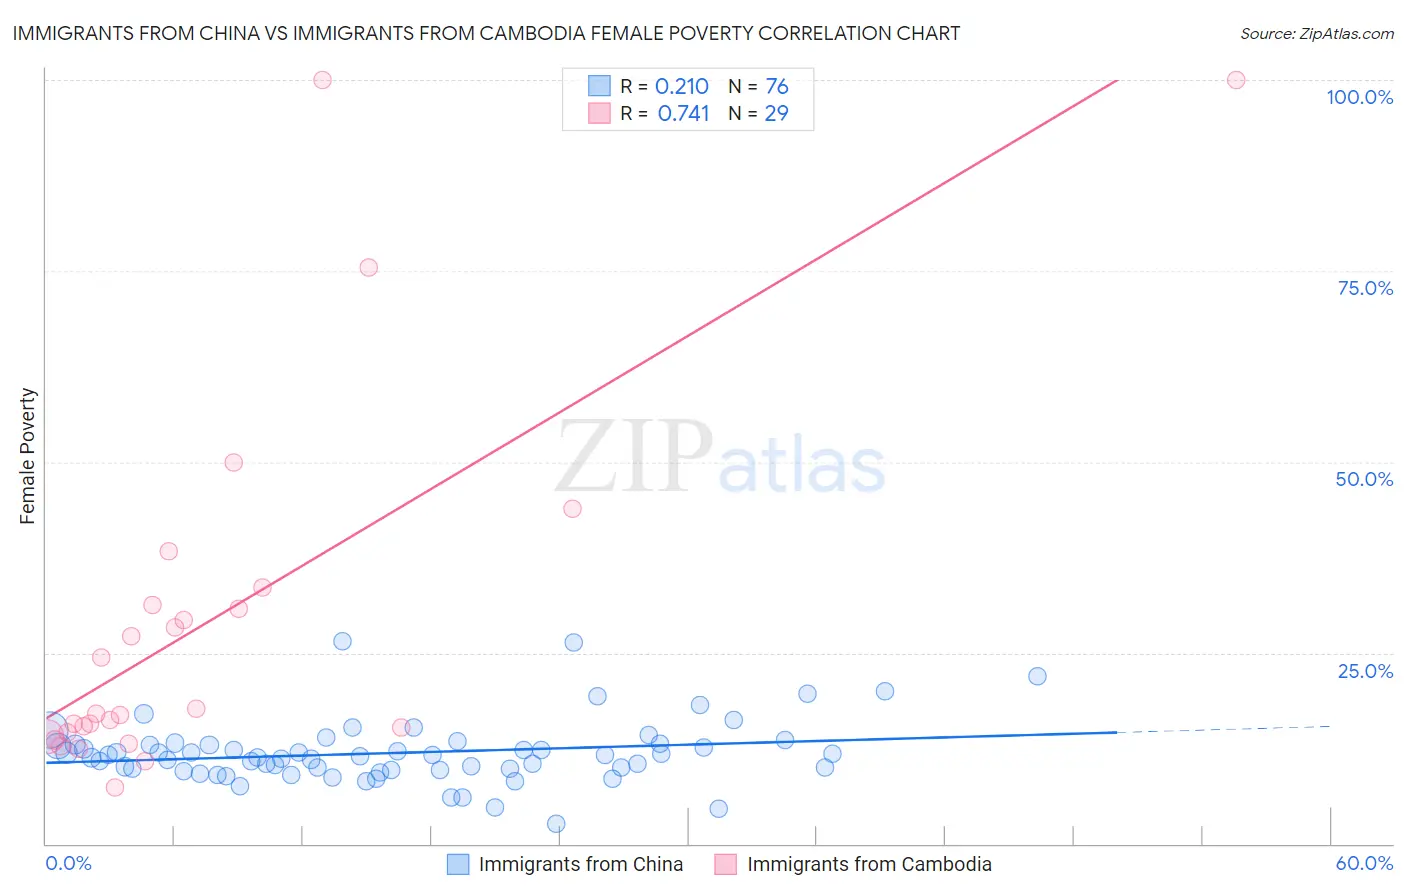 Immigrants from China vs Immigrants from Cambodia Female Poverty